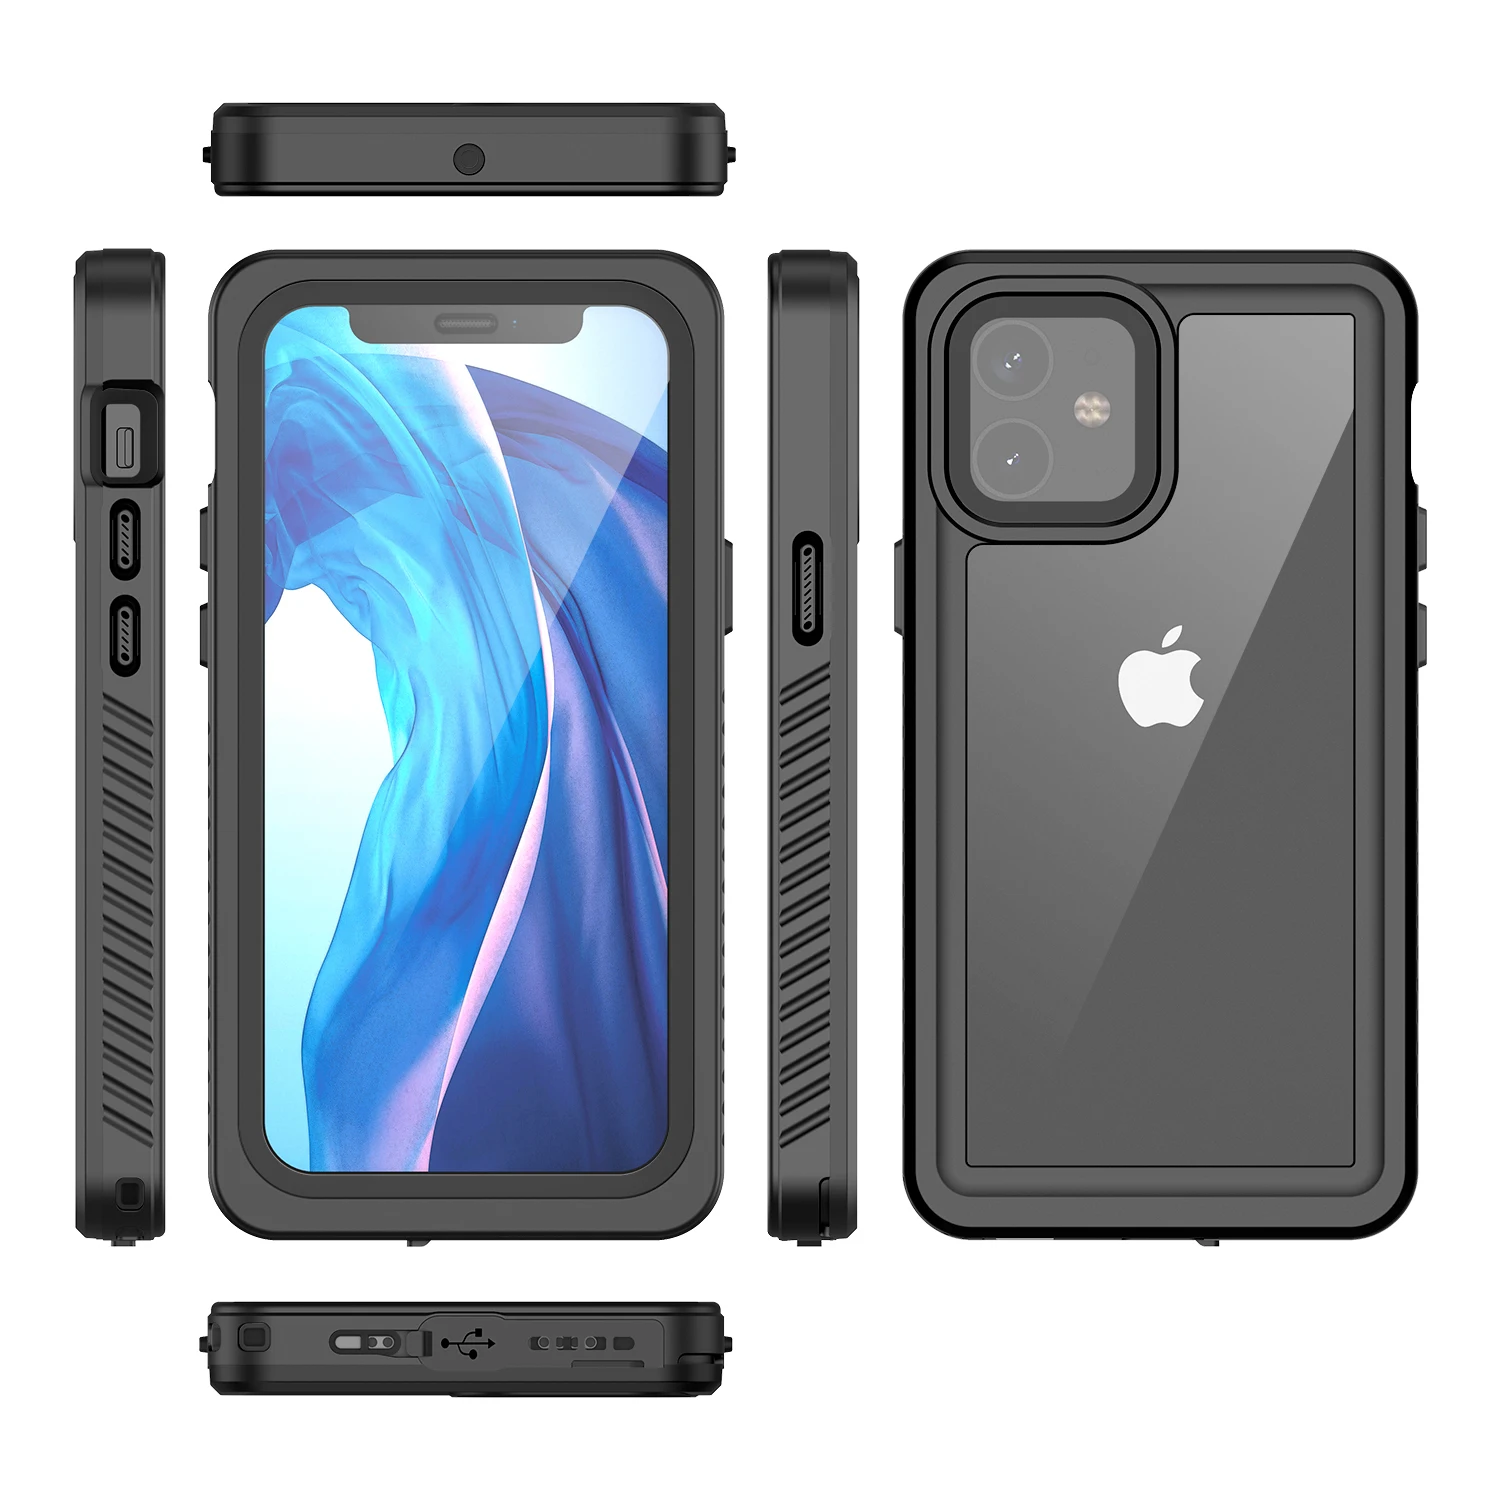 

Custom IP68 Waterproof Shockproof Face ID Water Proof Underwater Sports Outdoor Case Cover for iPhone 12 6.1'' Cell Phone Case, Black,yellow,white,green etc.